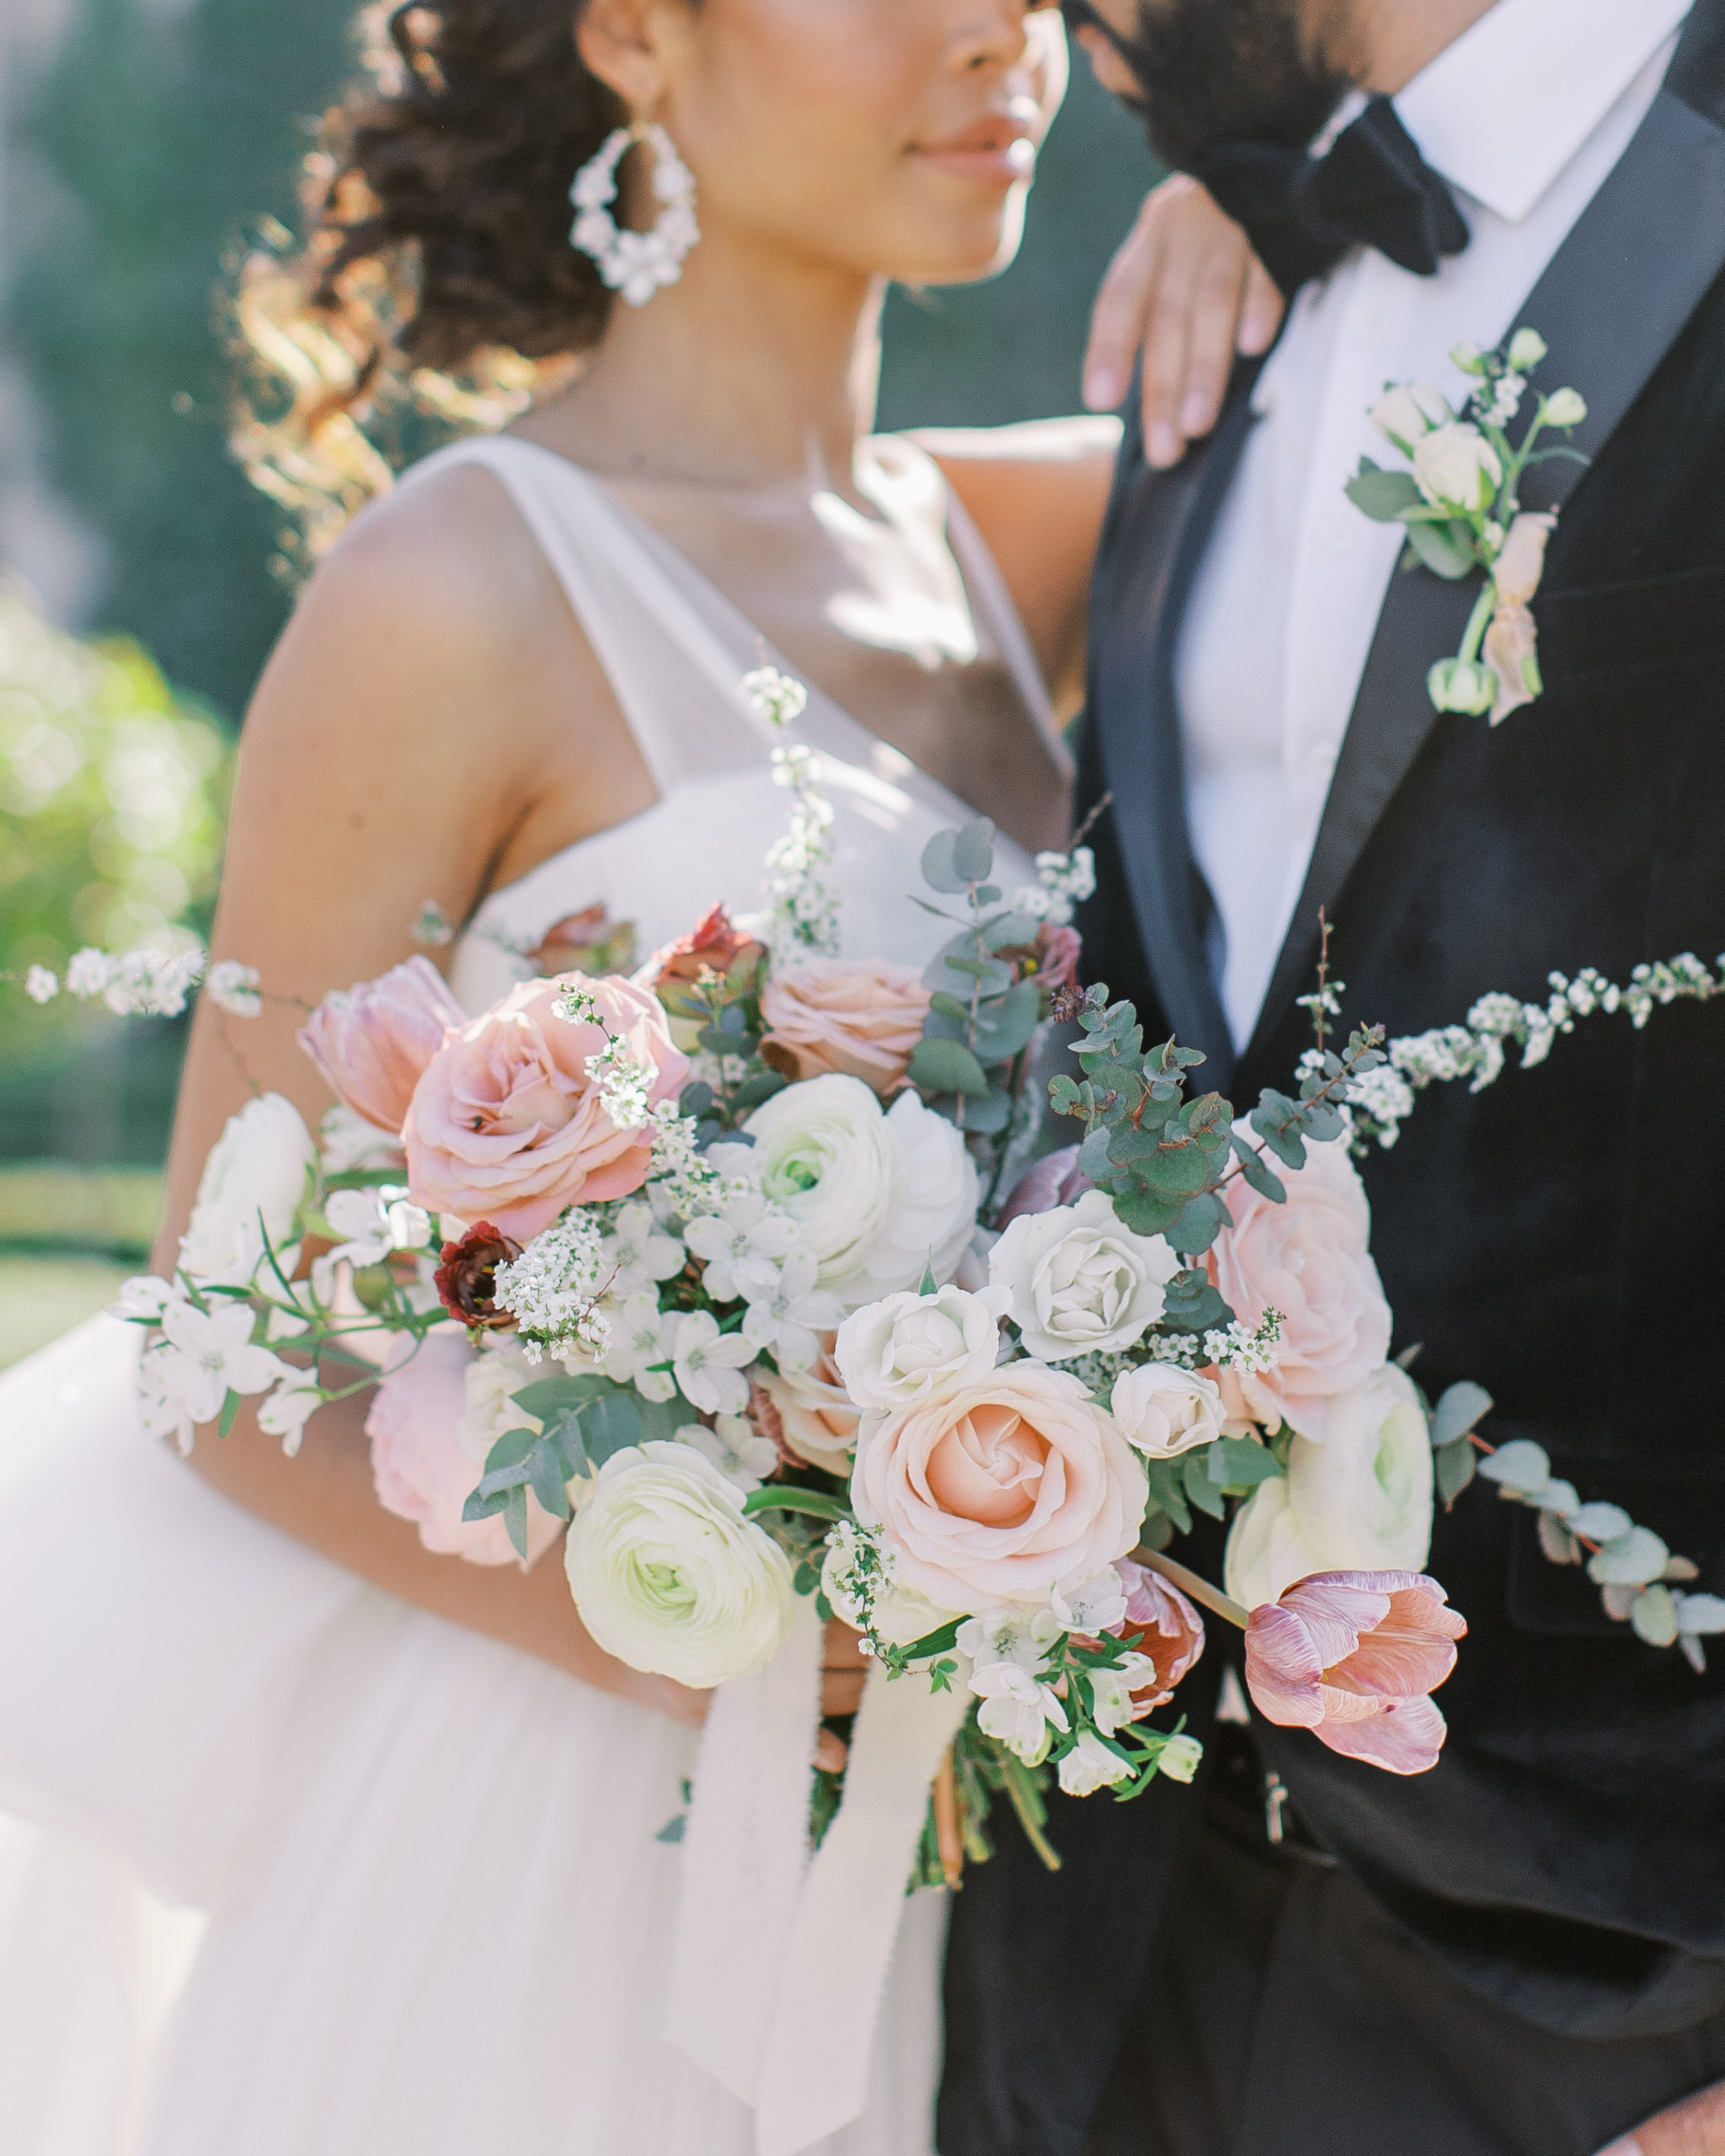 Bride and groom with beautiful cream and pink rose bouquet 